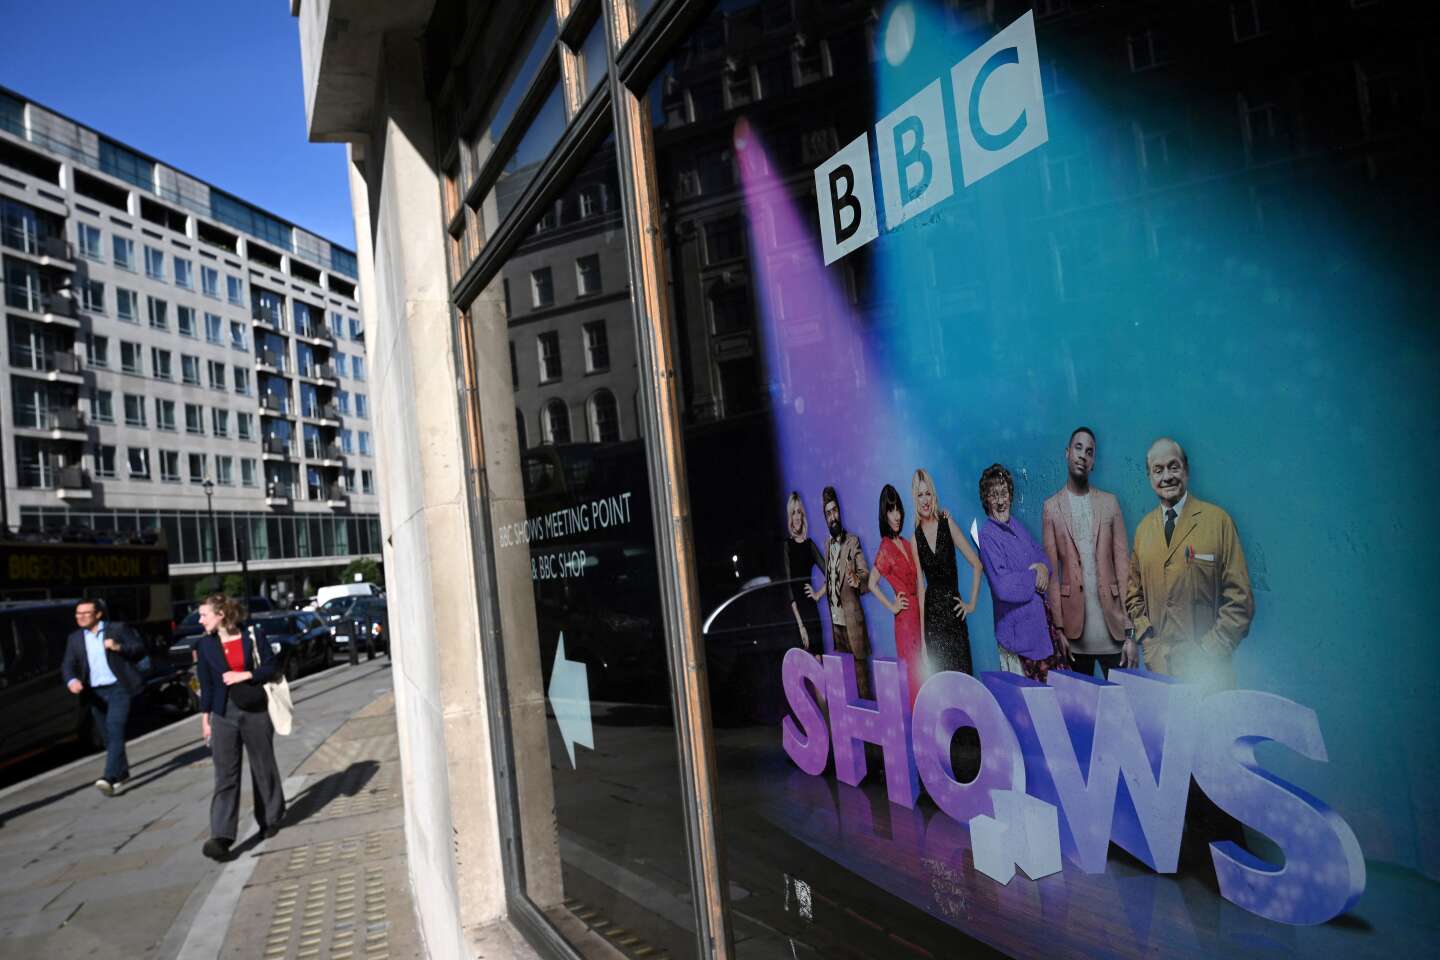 In the United Kingdom, storm around the “impartiality” of the BBC